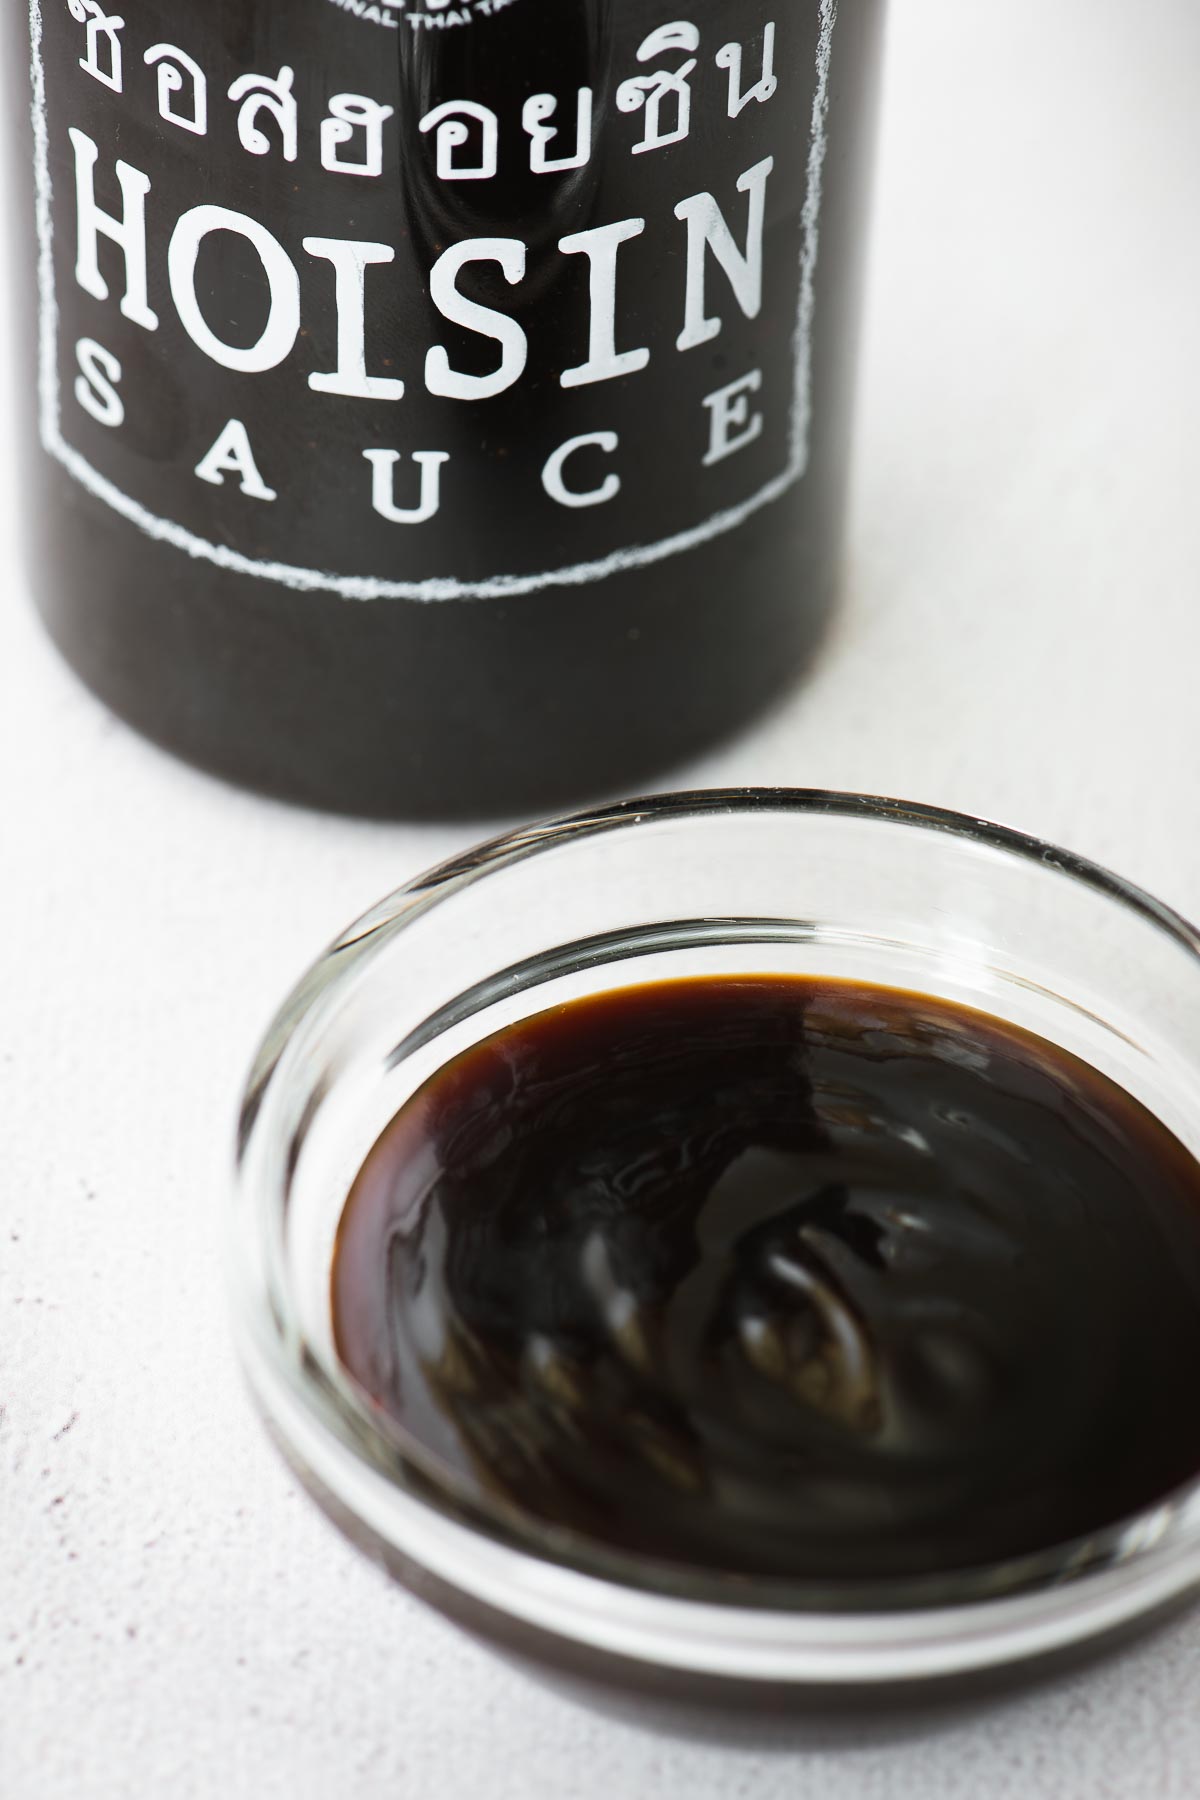 Hoisin sauce in a small glass bowl with a labelled hoisin sauce bottle in the background.